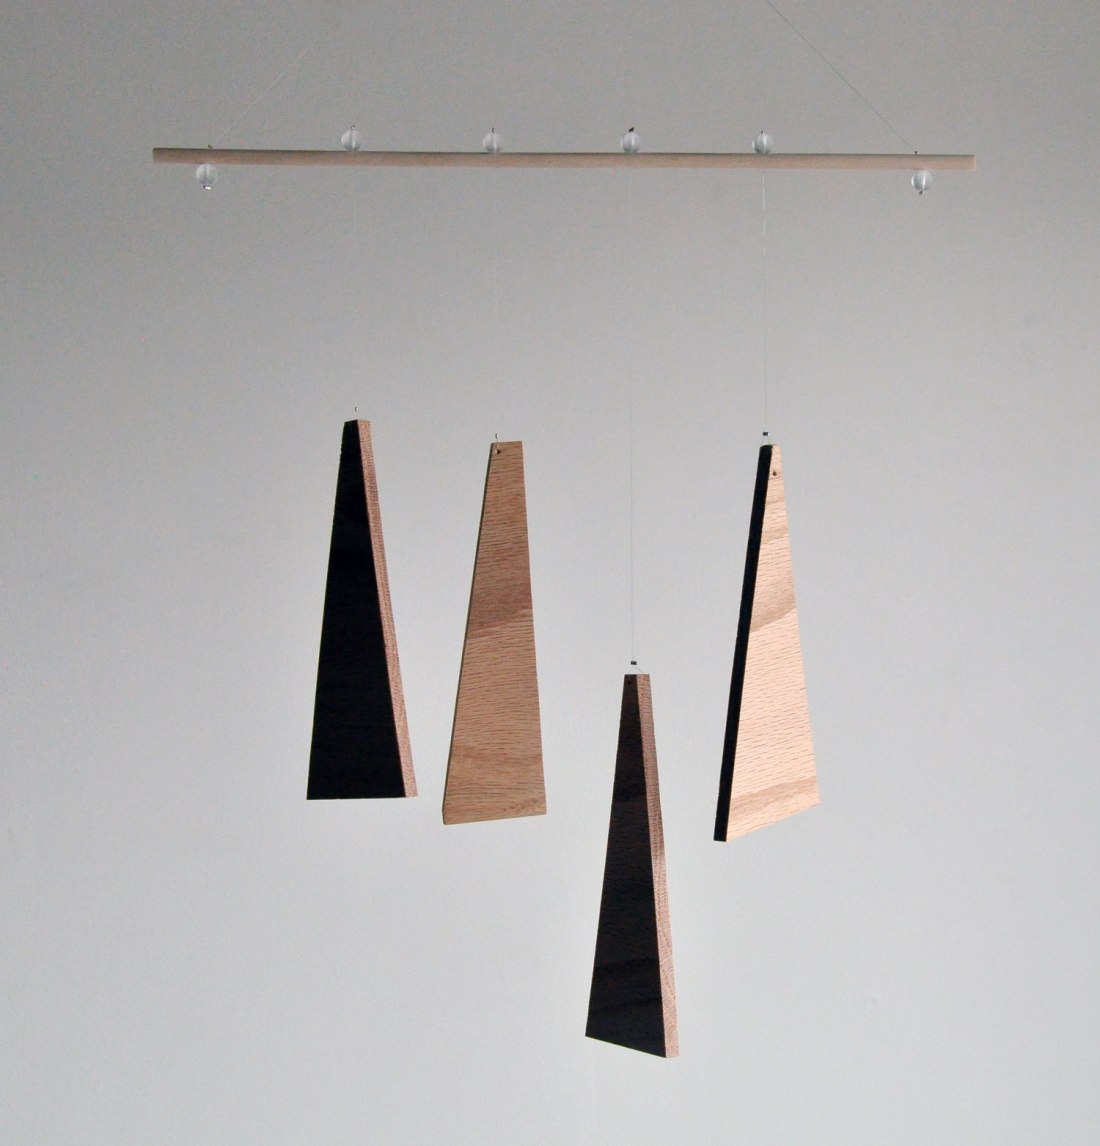 Annex Suspended Art - Natural Equilibrium Abstract Wood Wall Hanging or Mobile